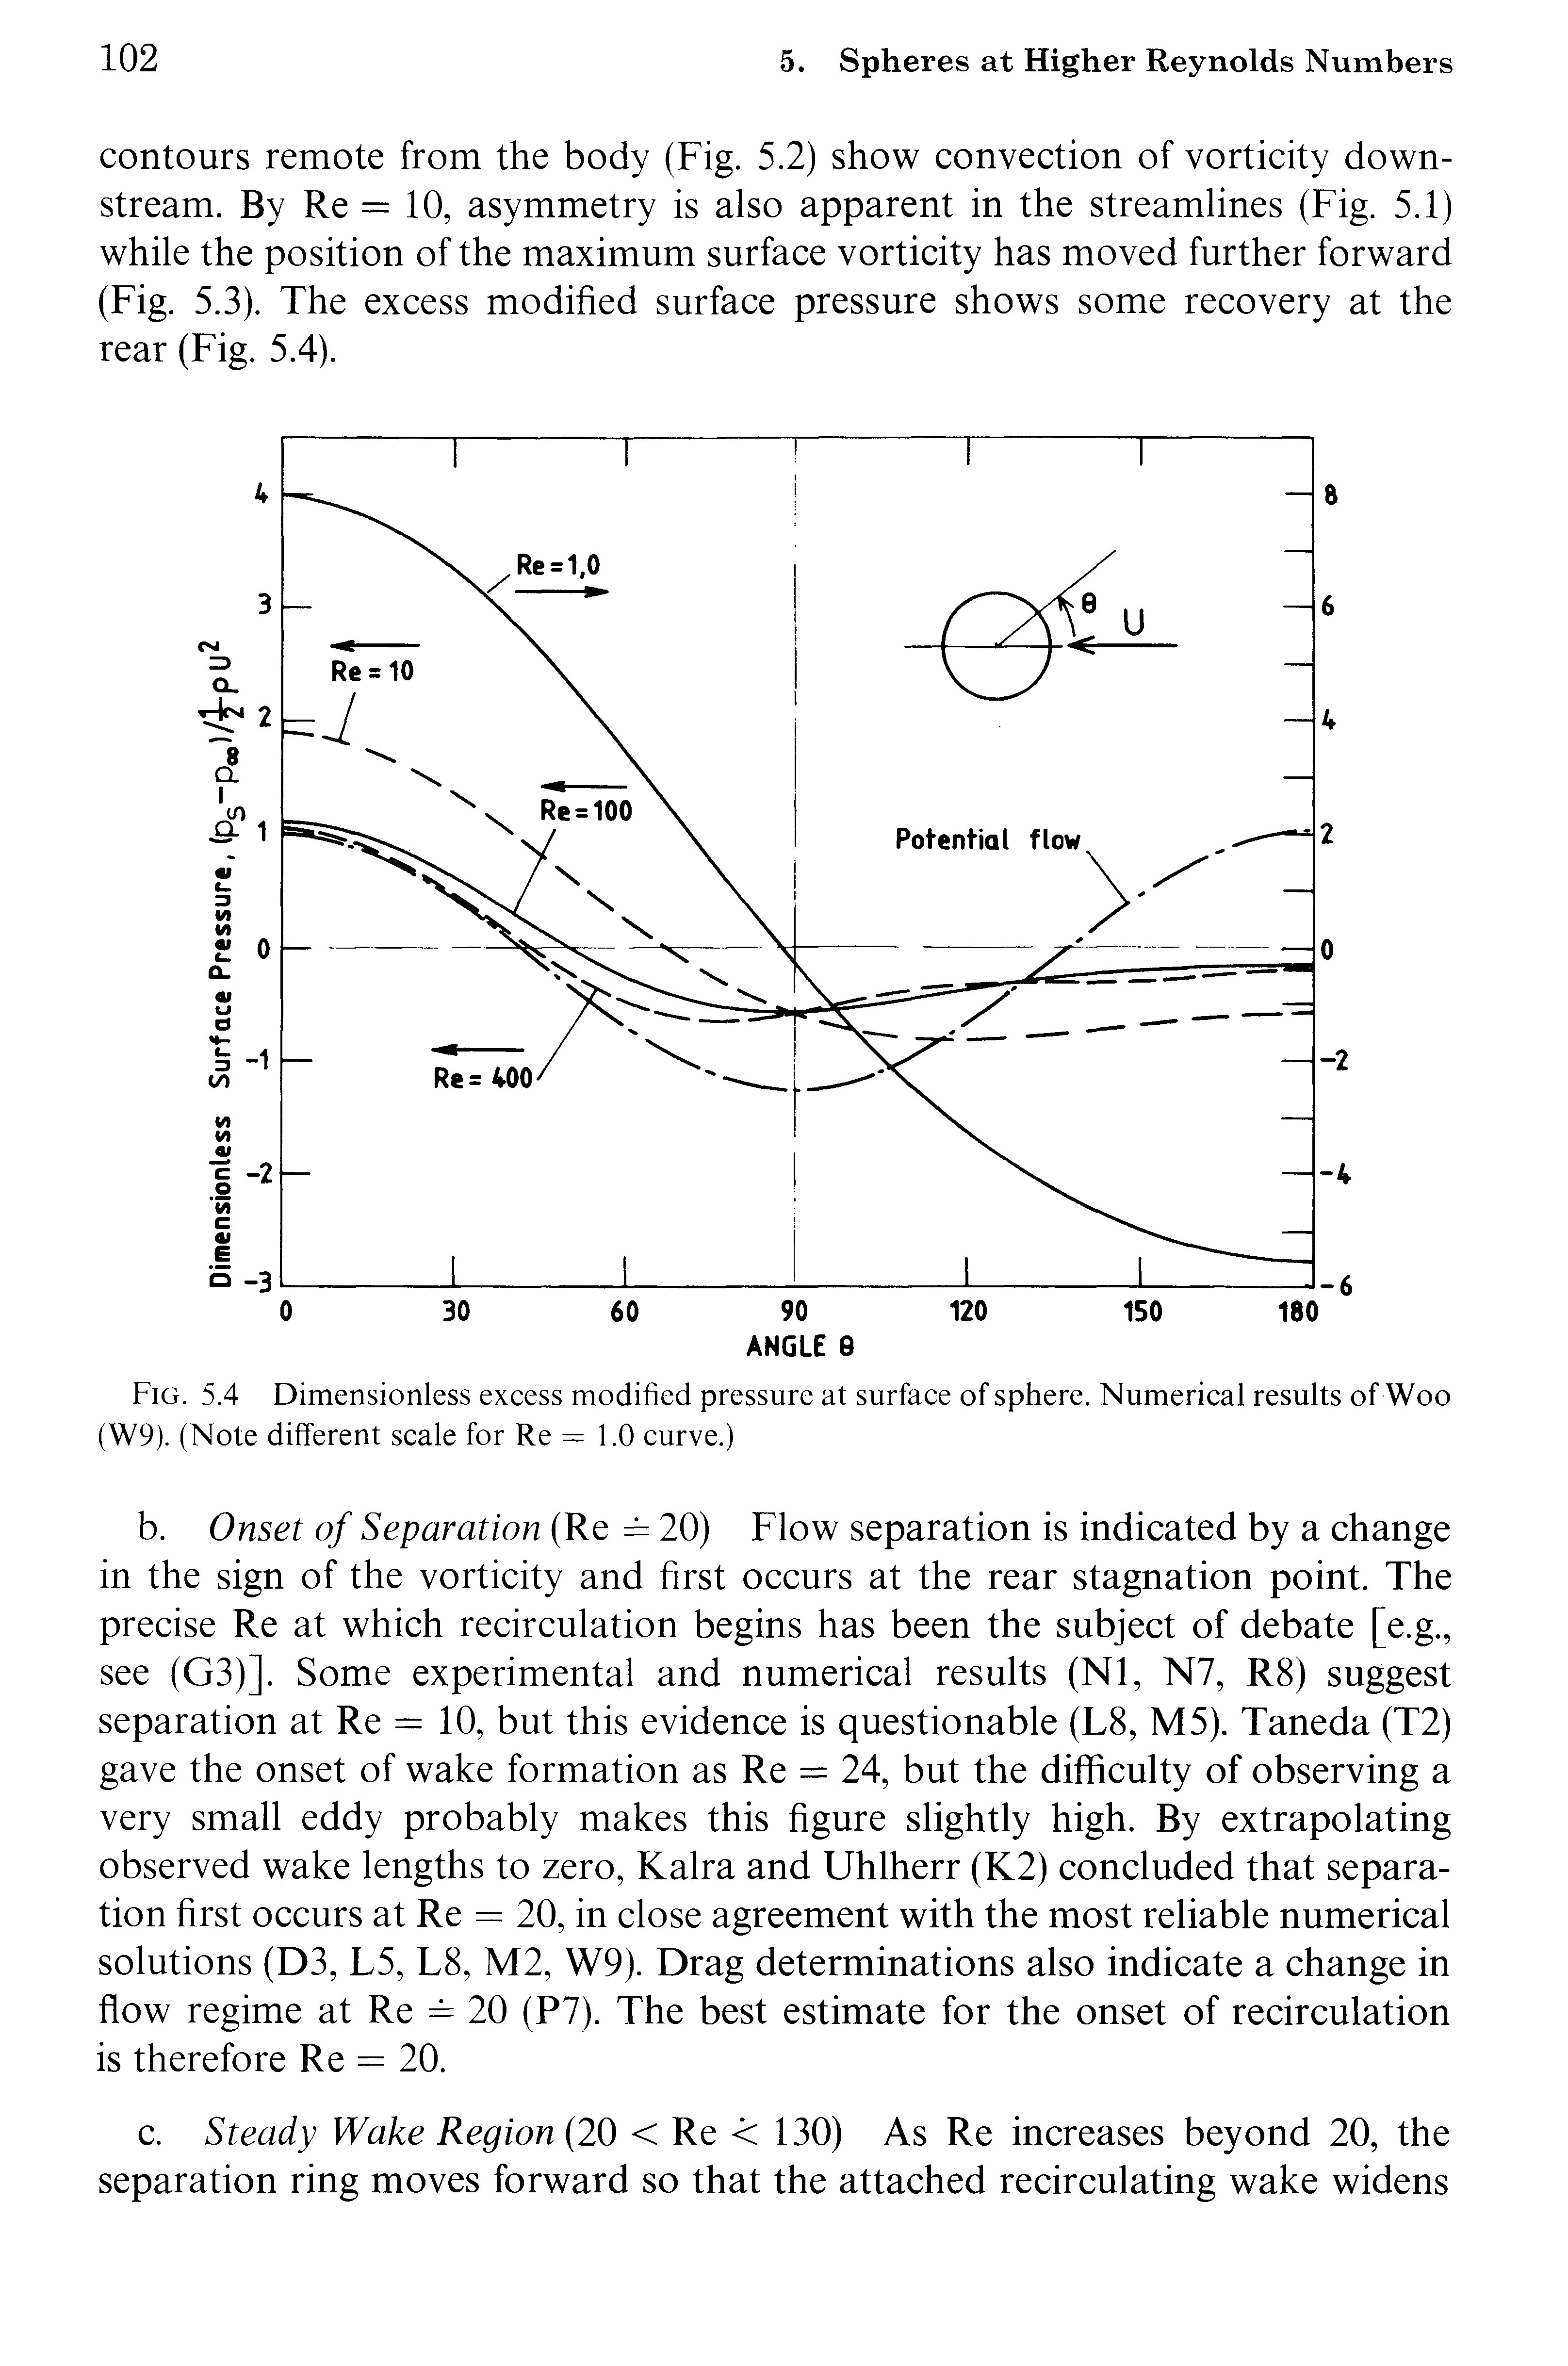 Fig. 5.4 Dimensionless excess modified pressure at surface of sphere. Numerical results of Woo (W9). (Note different scale for Re = 1.0 curve.)...